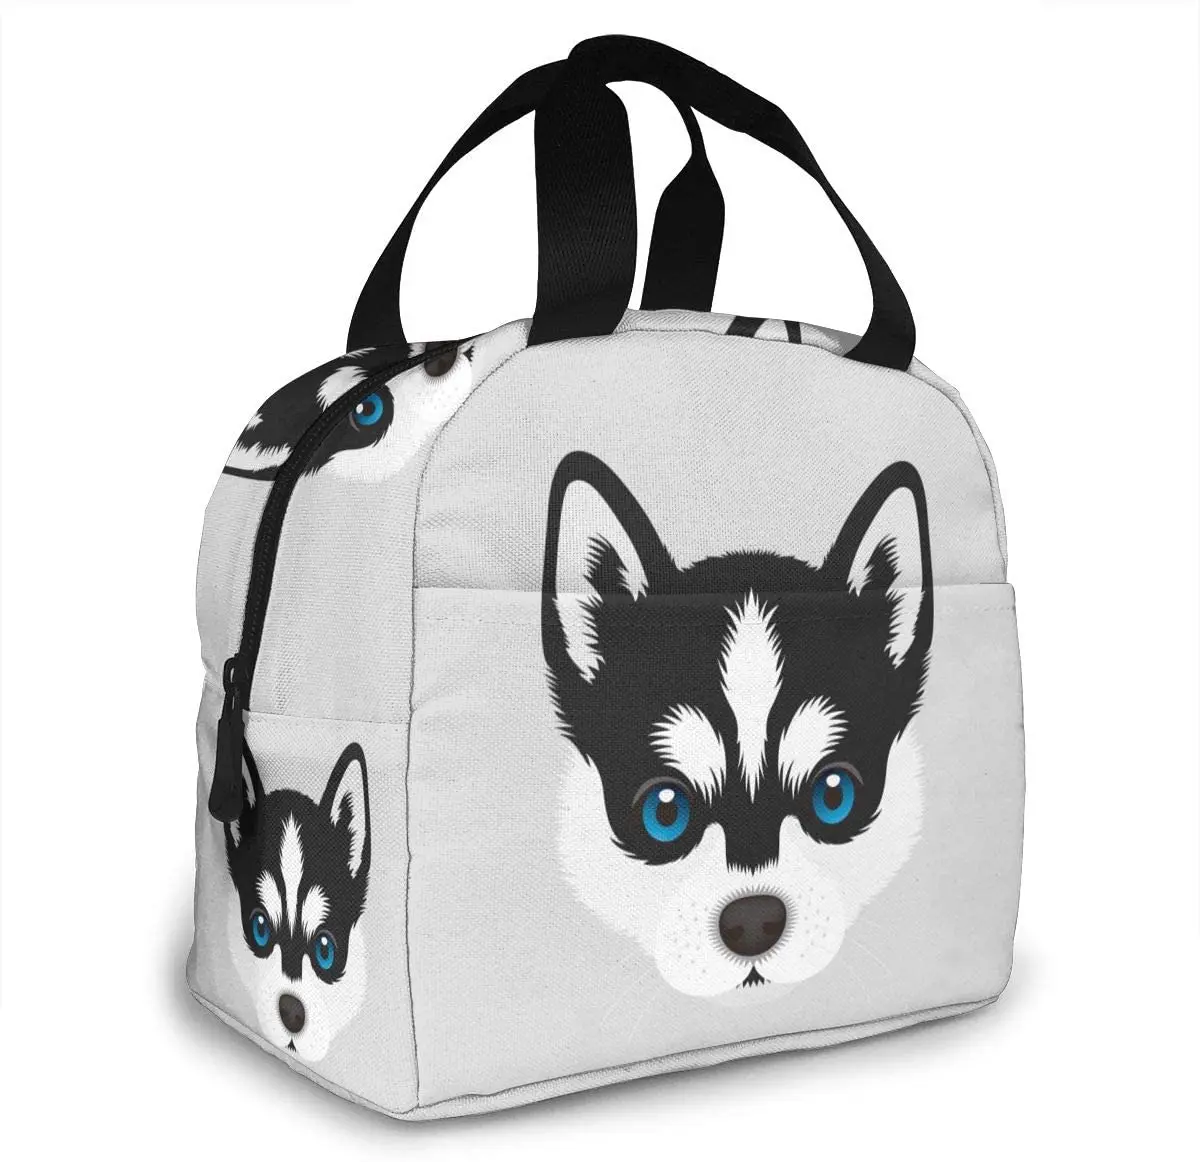 Funny Dog Puppy Siberian Husky Insulated Lunch Box Reusable Cooler Tote Bag Waterproof Lunch Holder Gift for Women Work Picnic